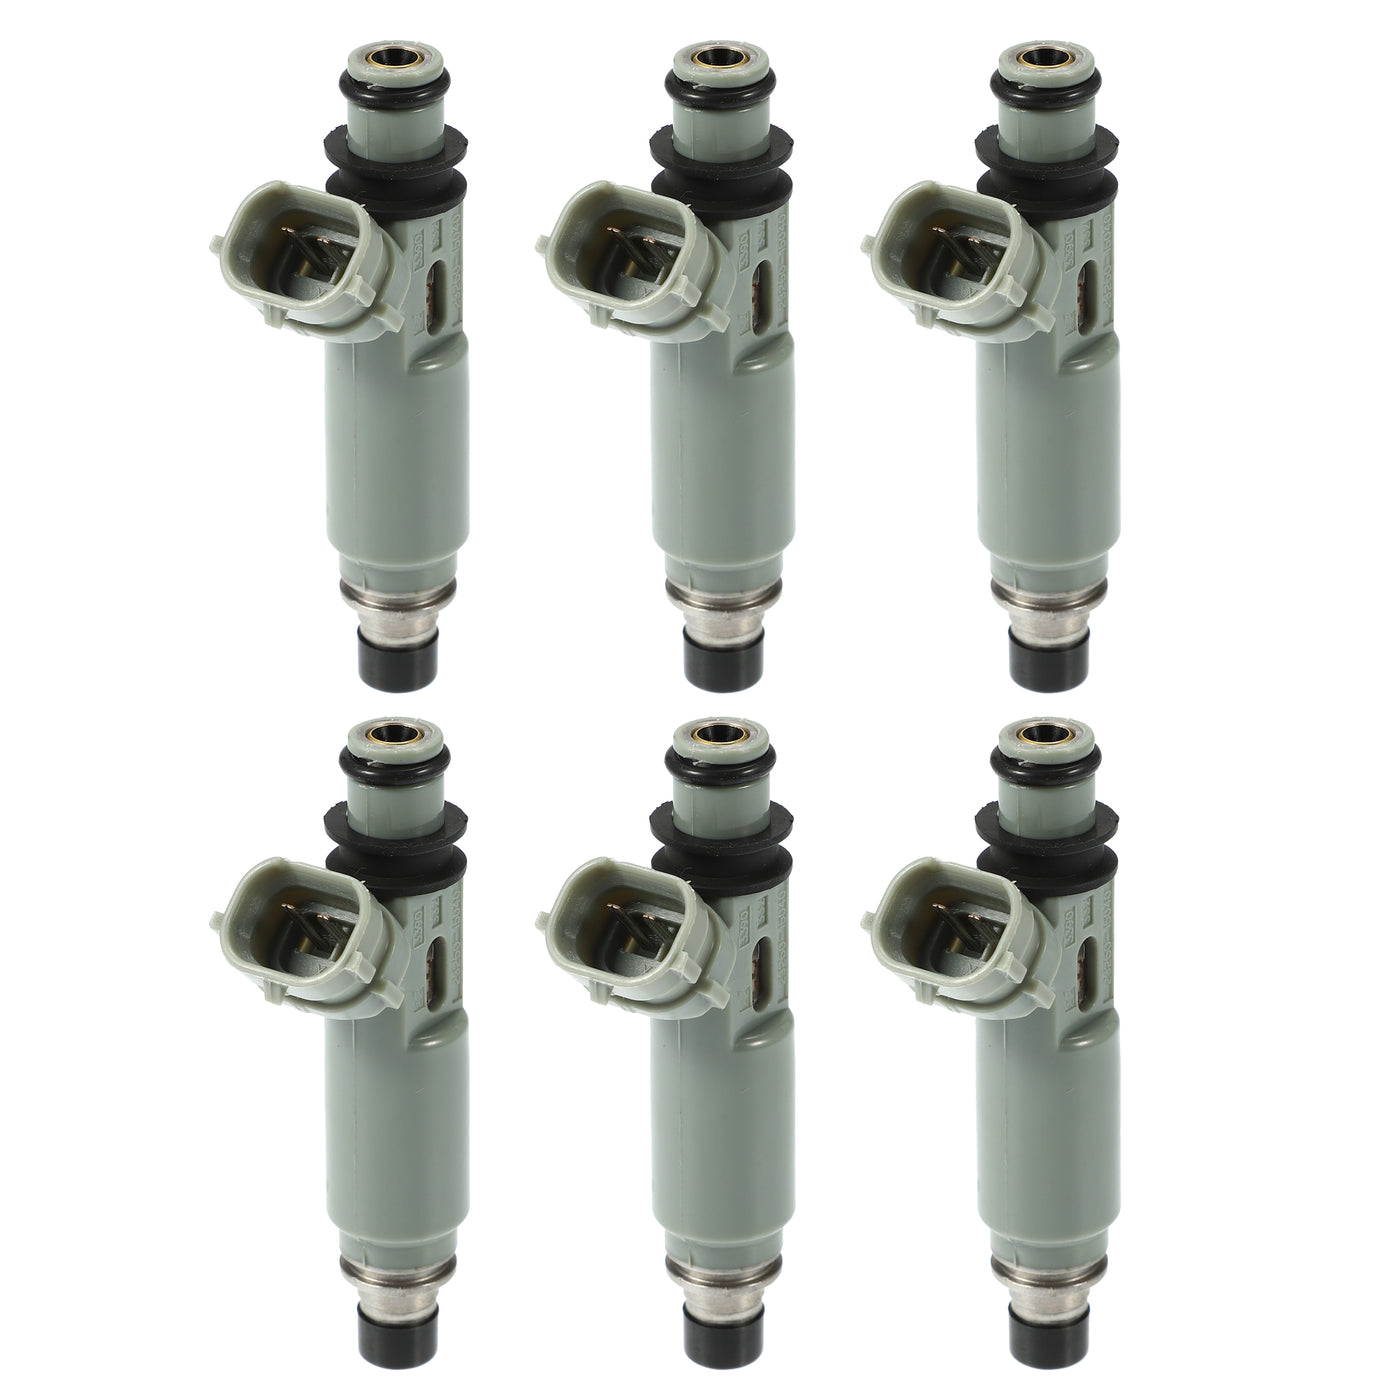 ACROPIX Car Fuel Injector Nozzle Replace for Toyota Corolla AE11 4AFE Soluna AL50 23209-15040 - Pack of 6 Gray